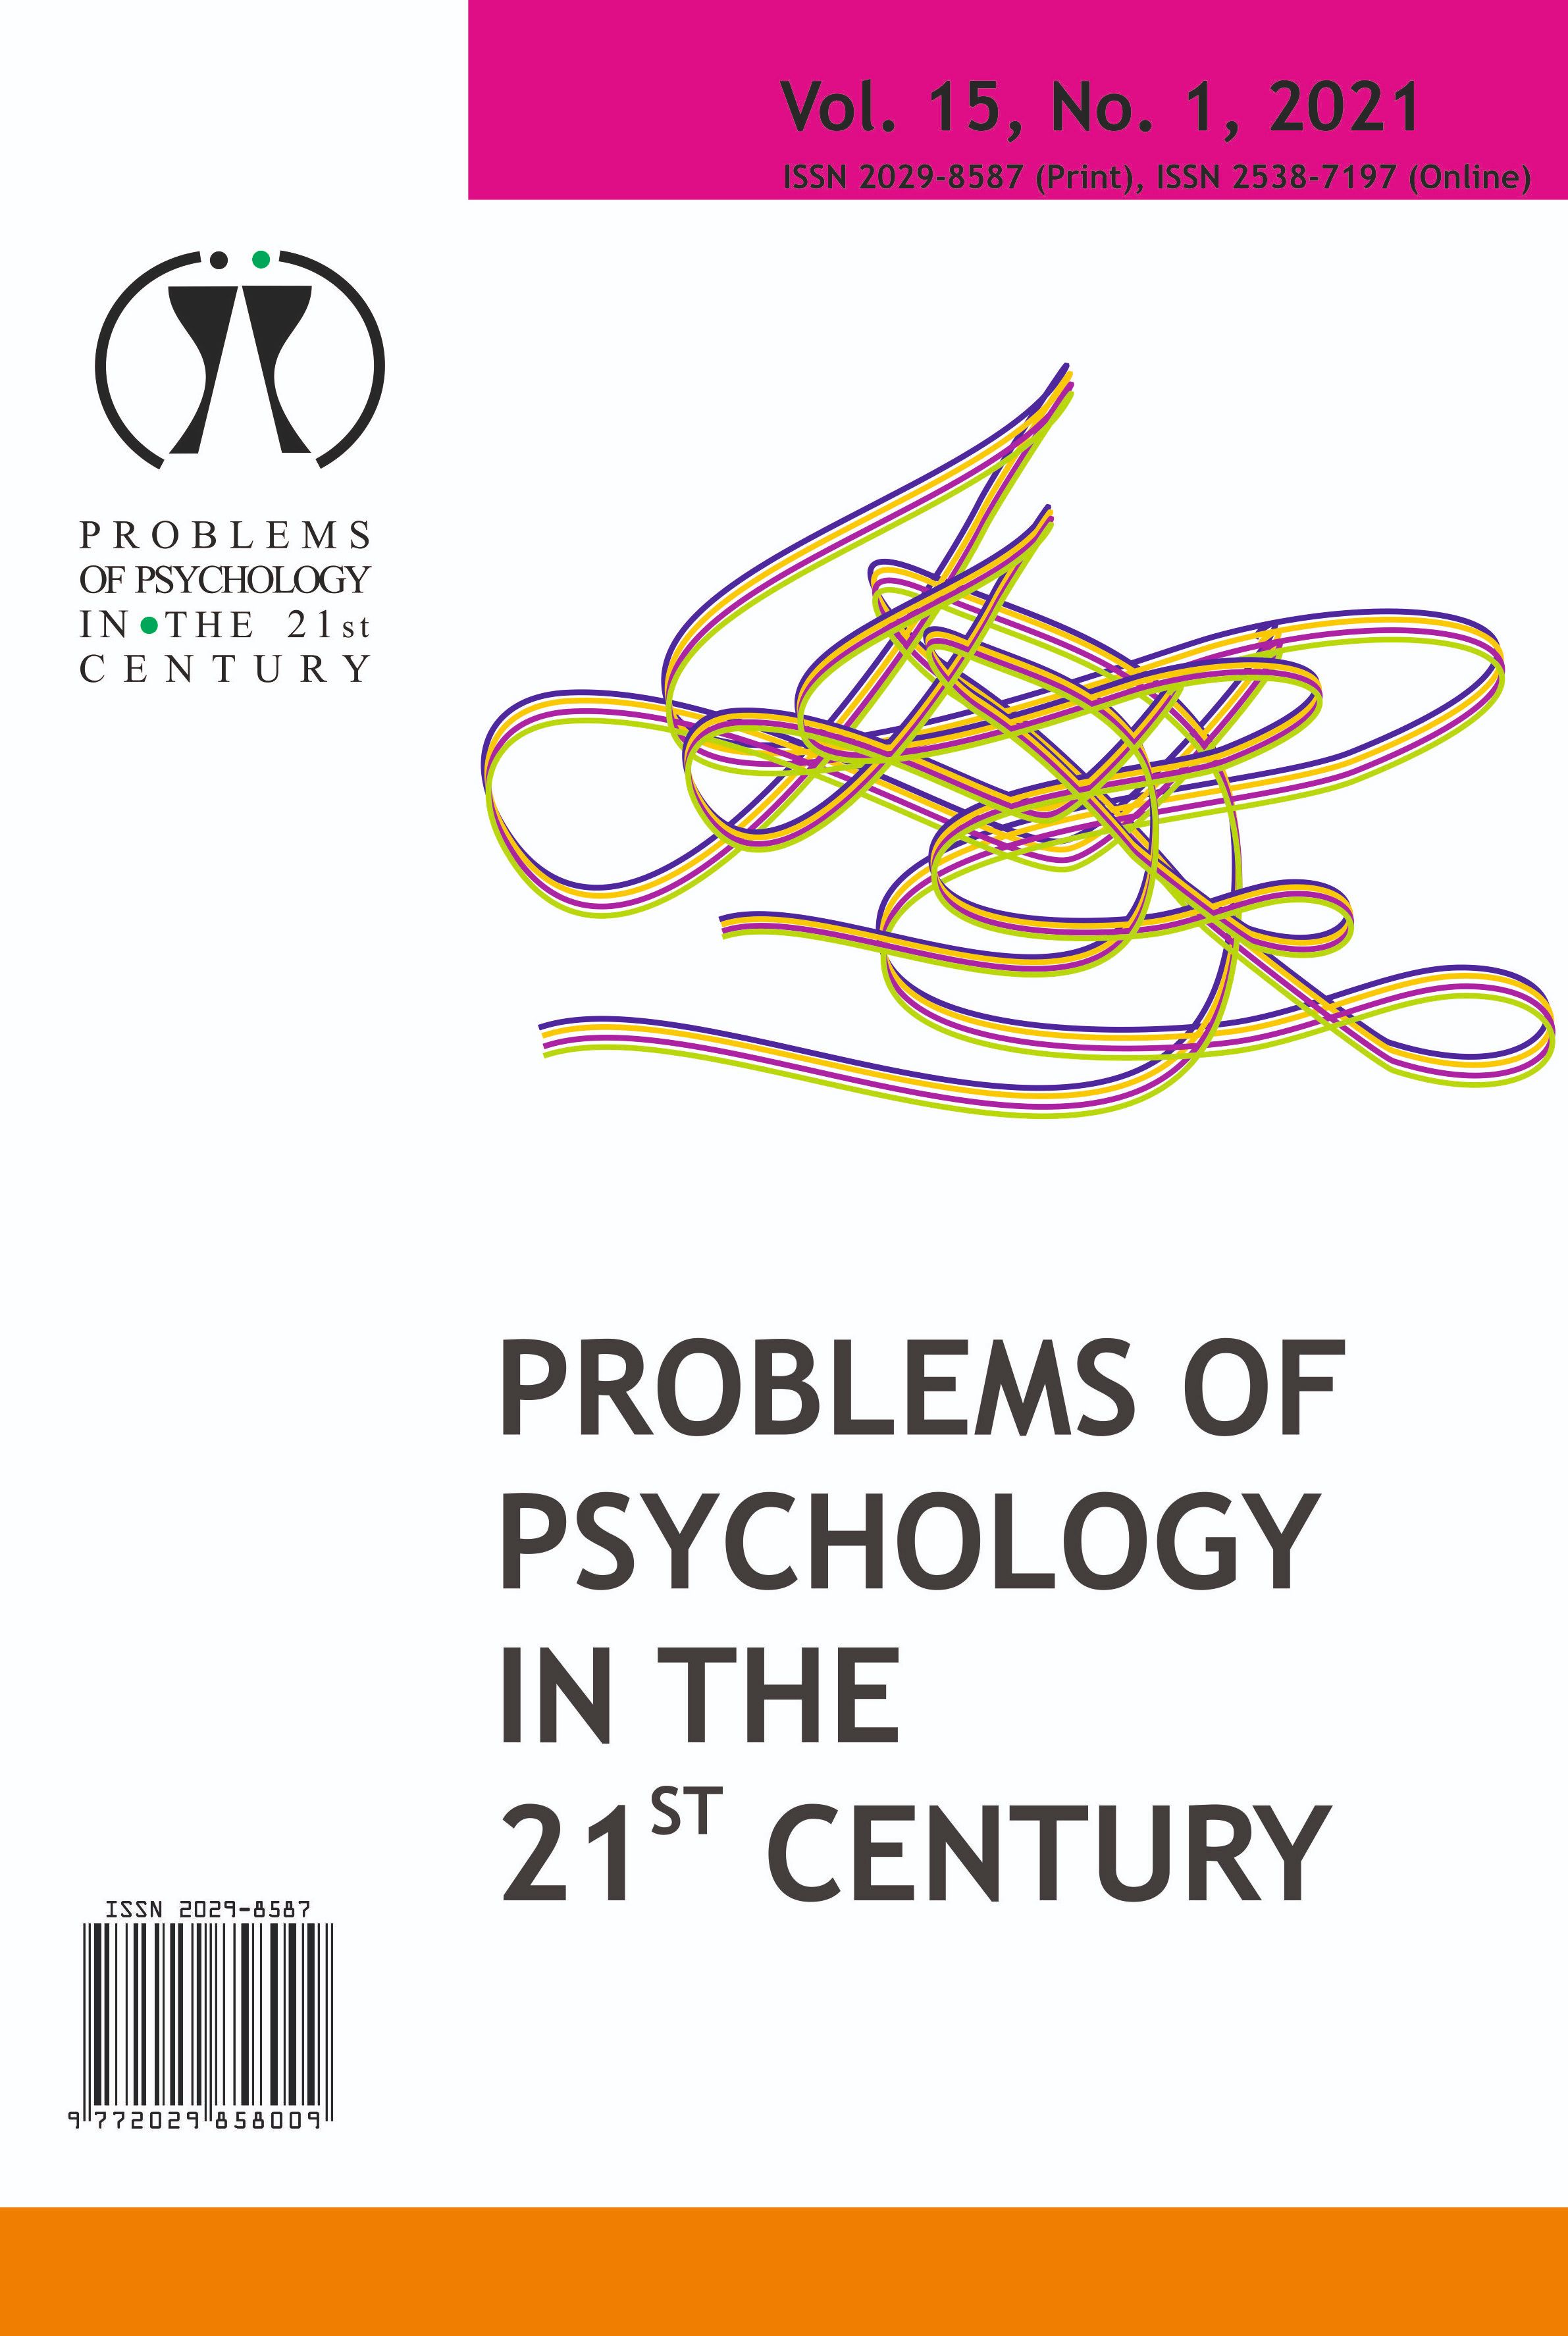 PAVLIV SESSION CONTINUES: ANNIVERSARY OF SEVEN DECADES FOR PSYCHOLOGY